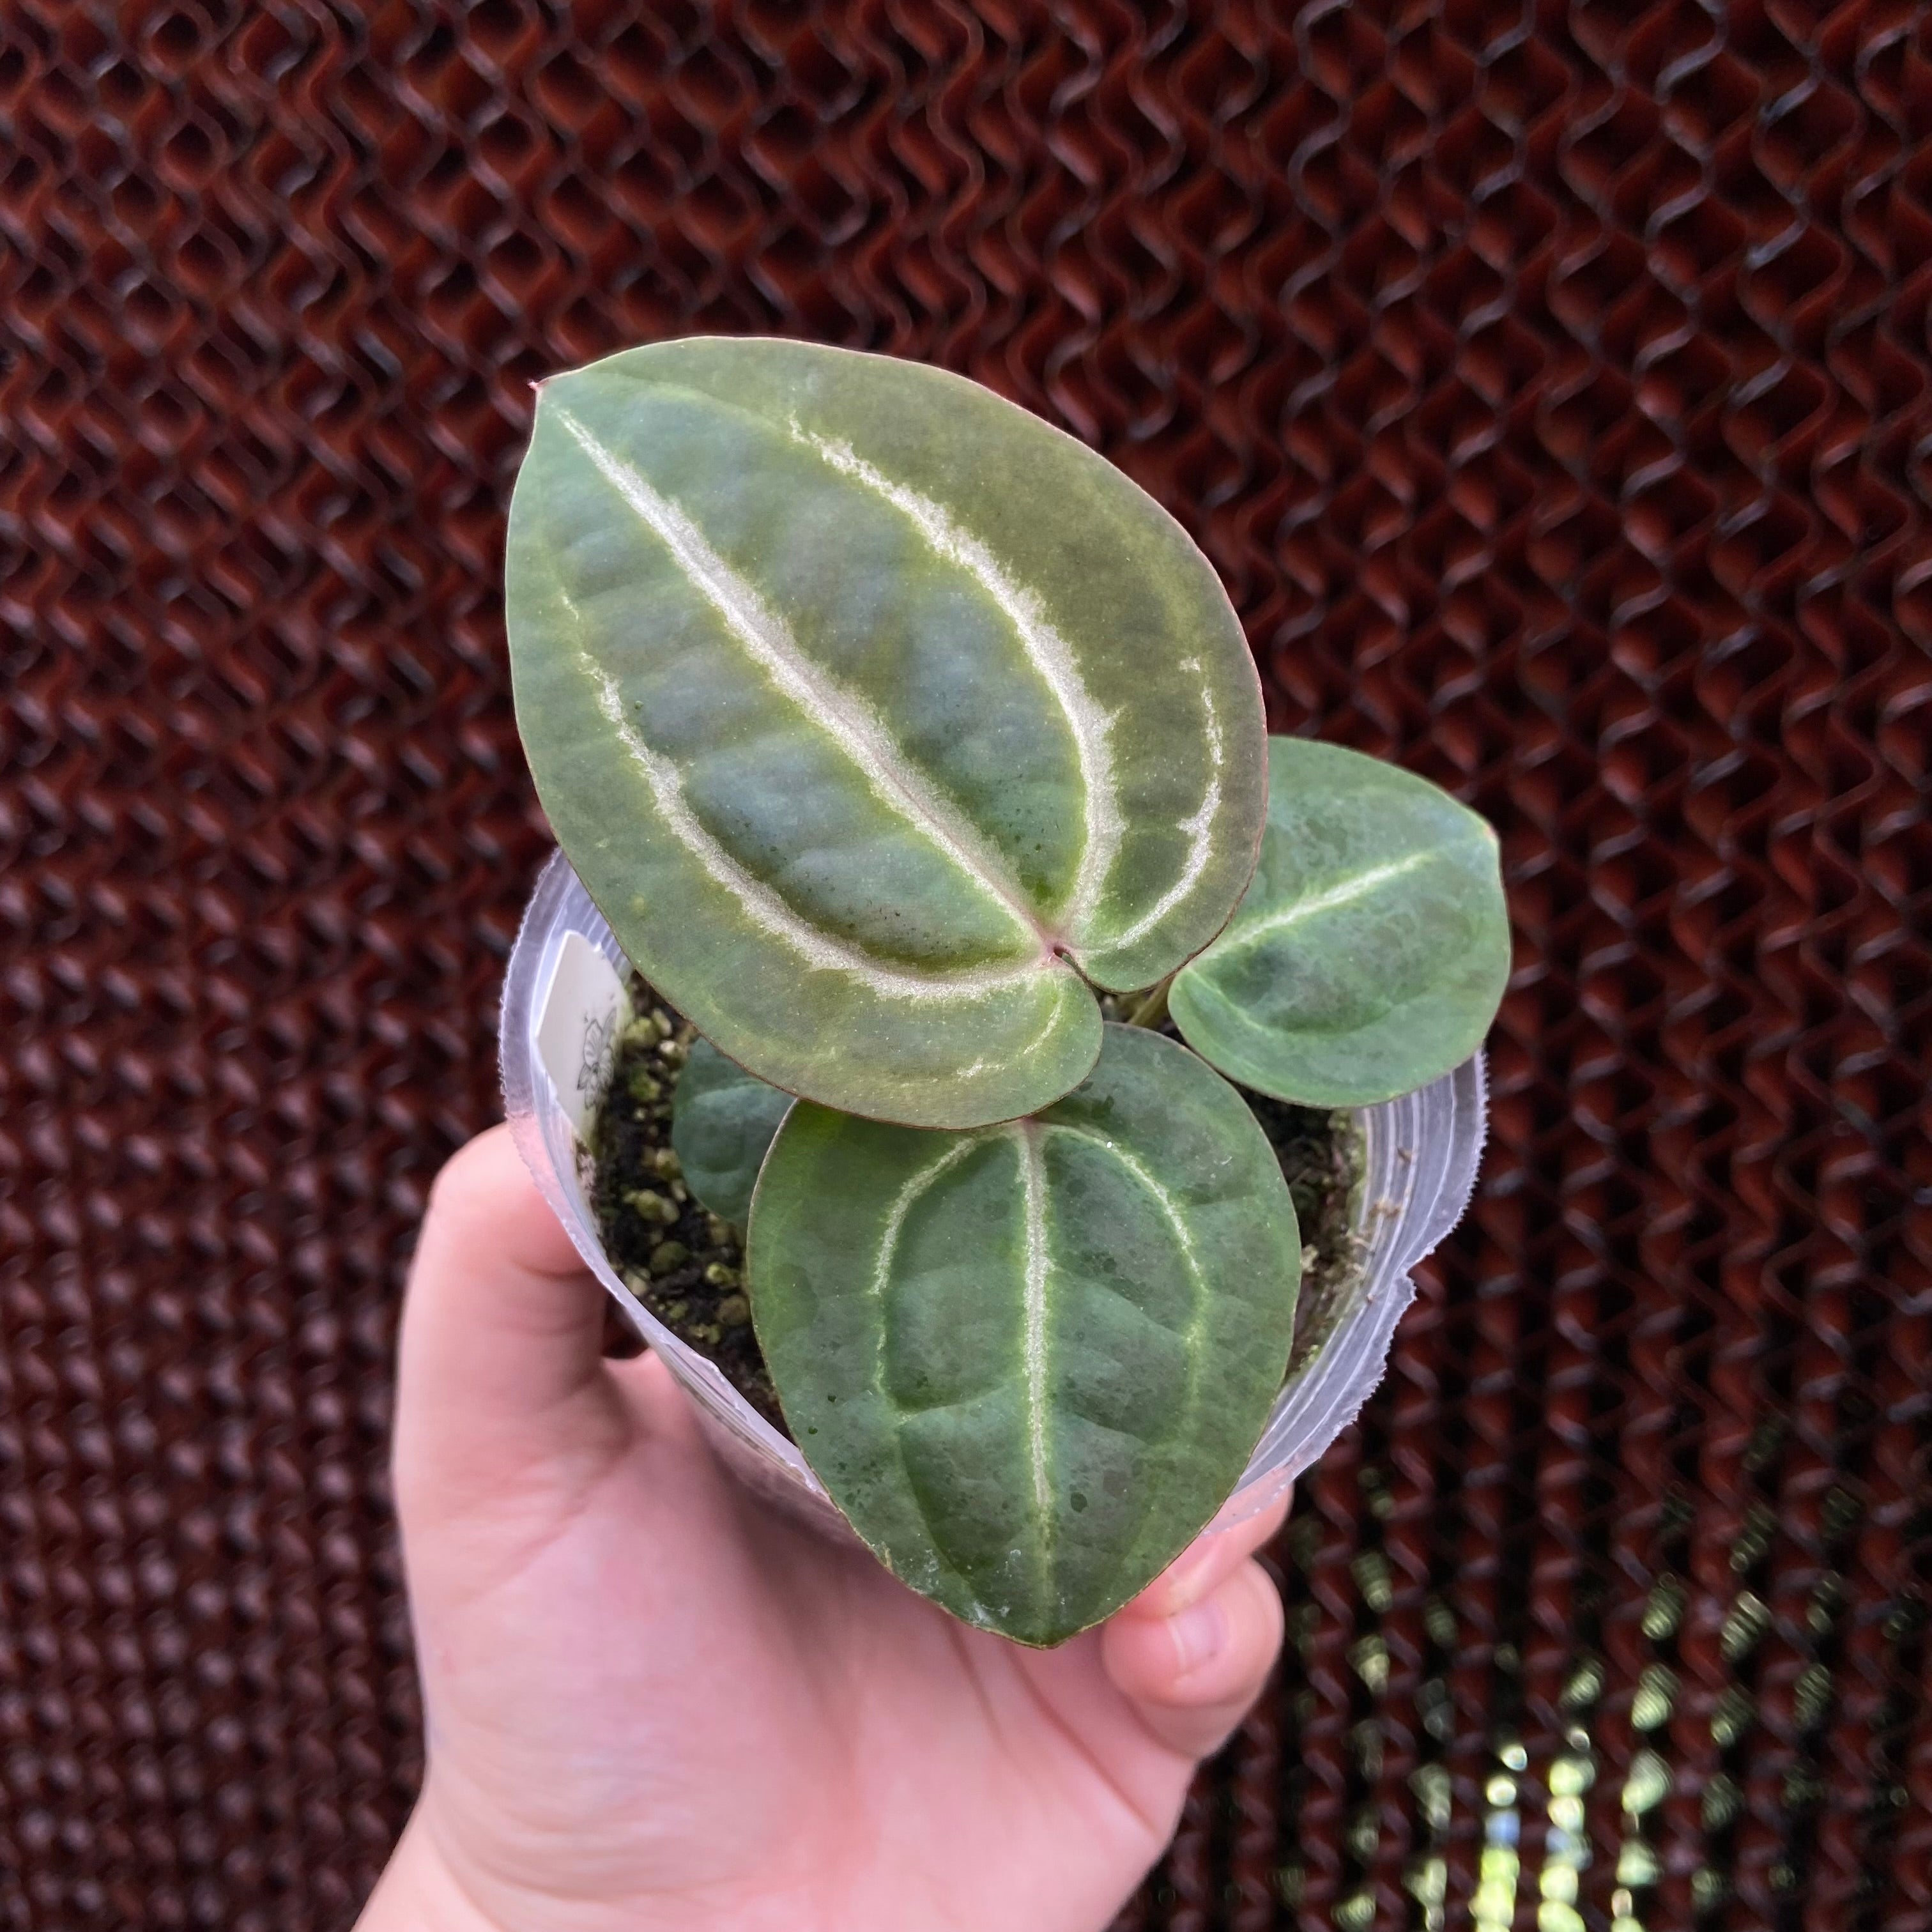 A. Red Crystal ‘Wu4’ x self (EXACT PLANT)